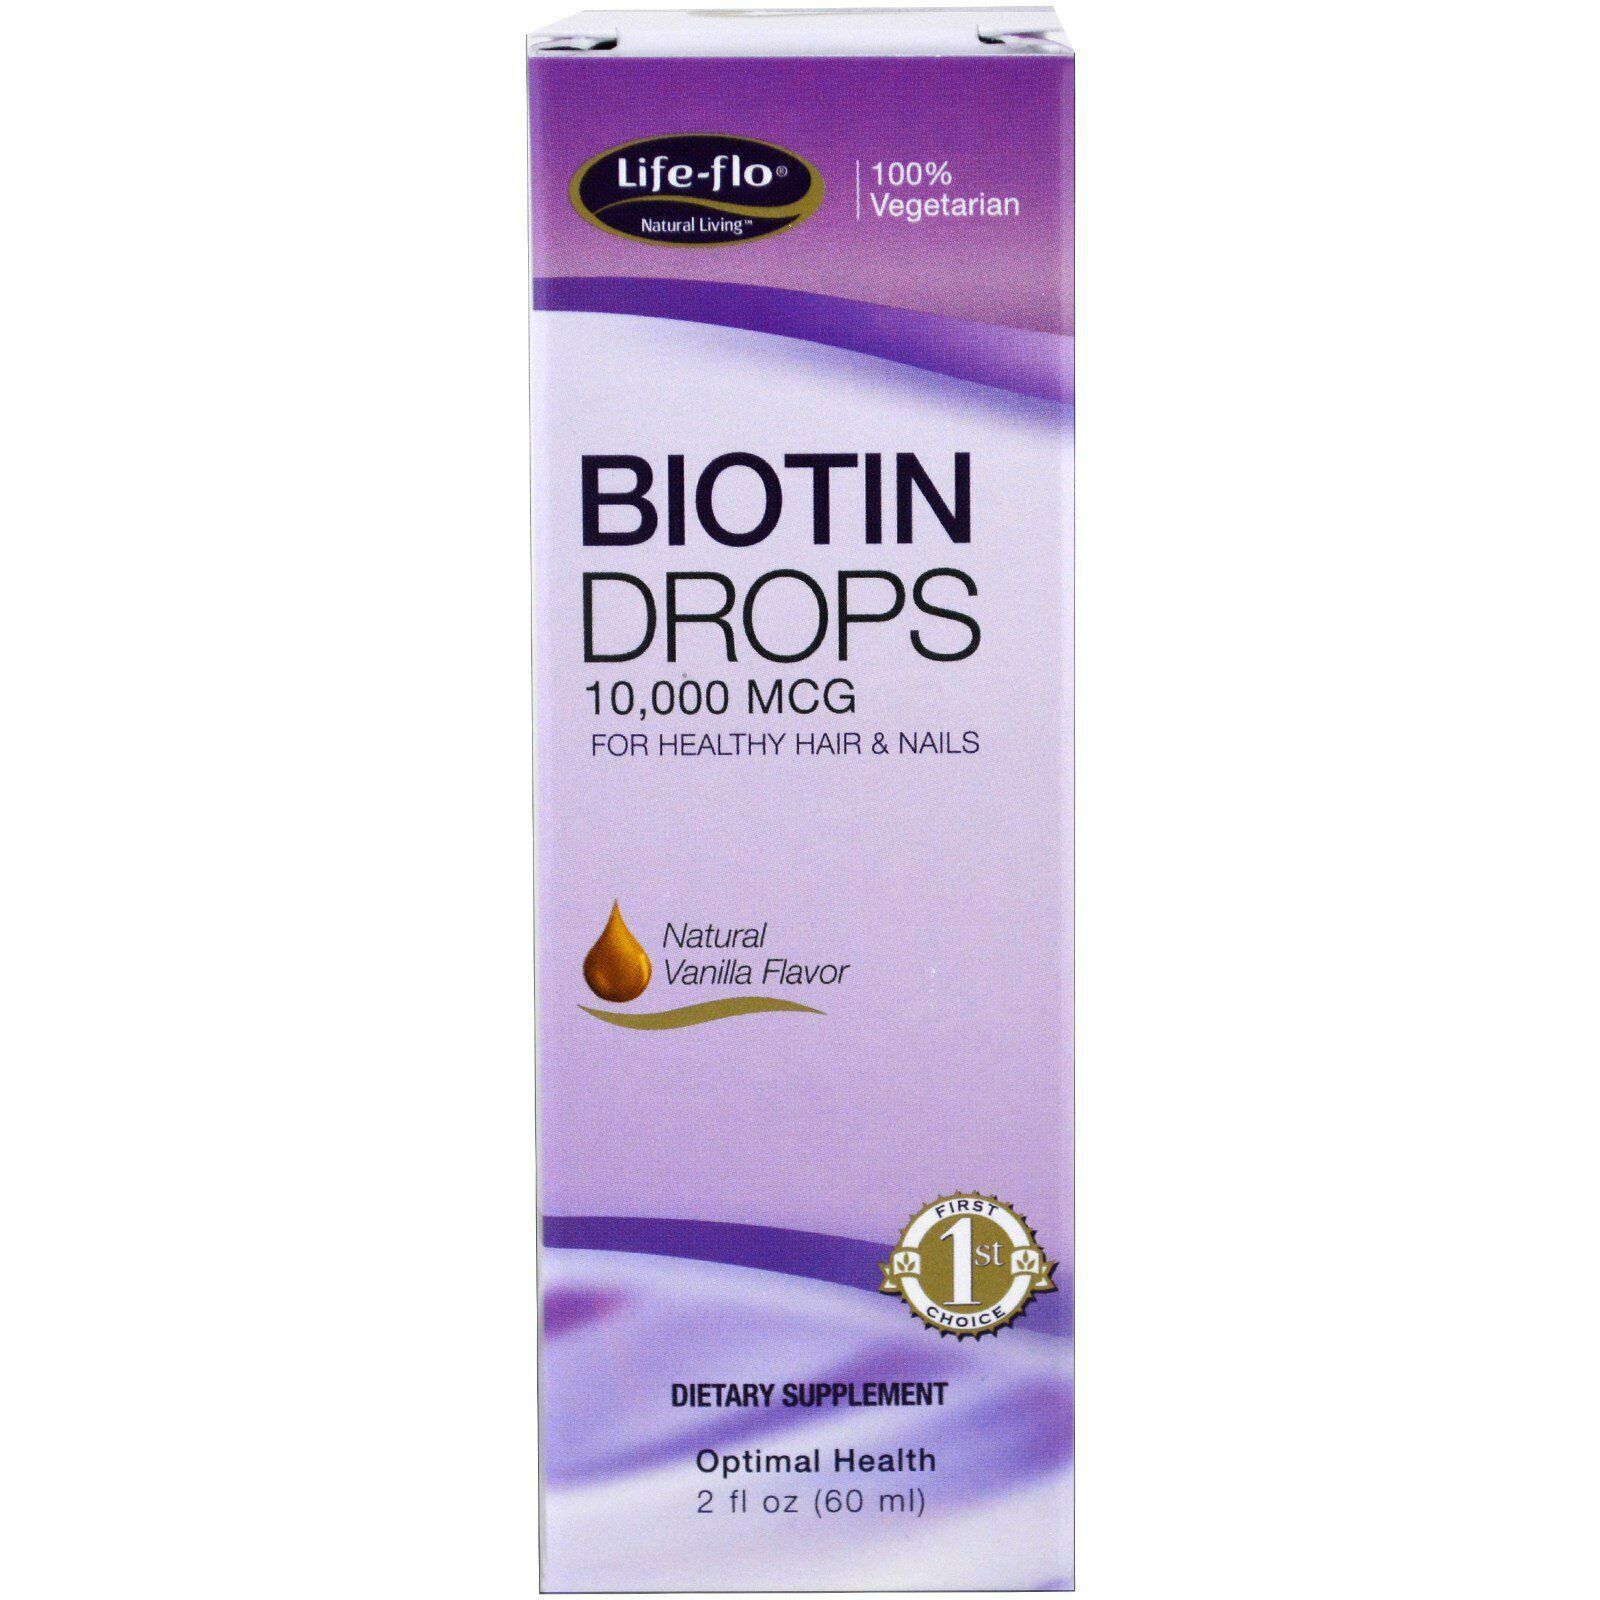 Primary image for Biotin Drops, For Healthy Hair & Nails, Natural Vanilla Flavor, 10,000 mcg, 2 fl